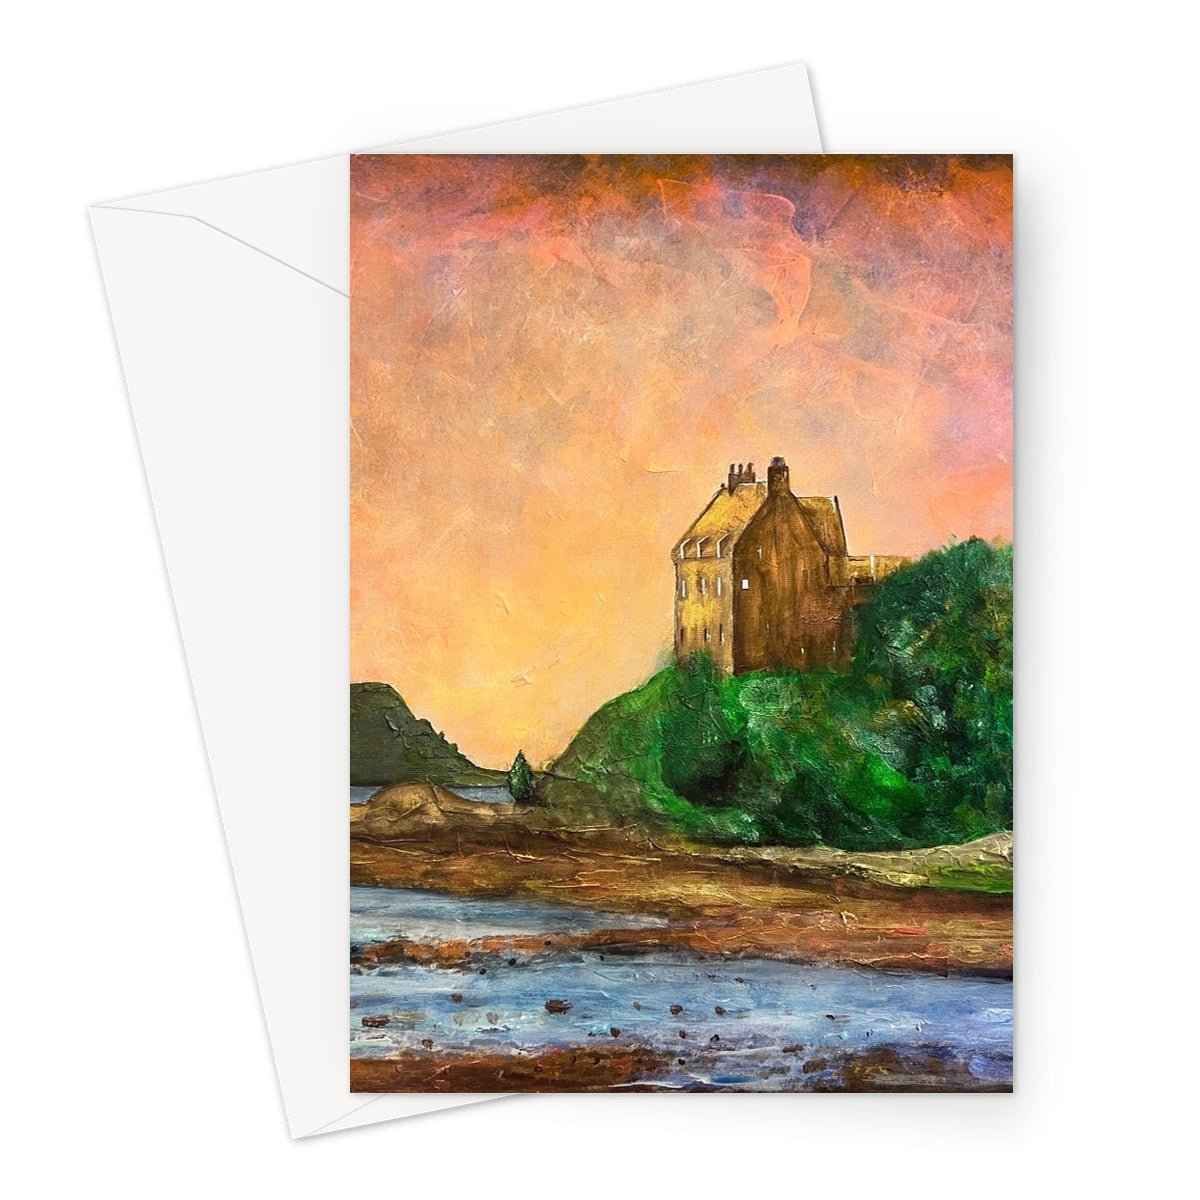 Duntrune Castle Art Gifts Greeting Card-Greetings Cards-Scottish Castles Art Gallery-A5 Portrait-10 Cards-Paintings, Prints, Homeware, Art Gifts From Scotland By Scottish Artist Kevin Hunter